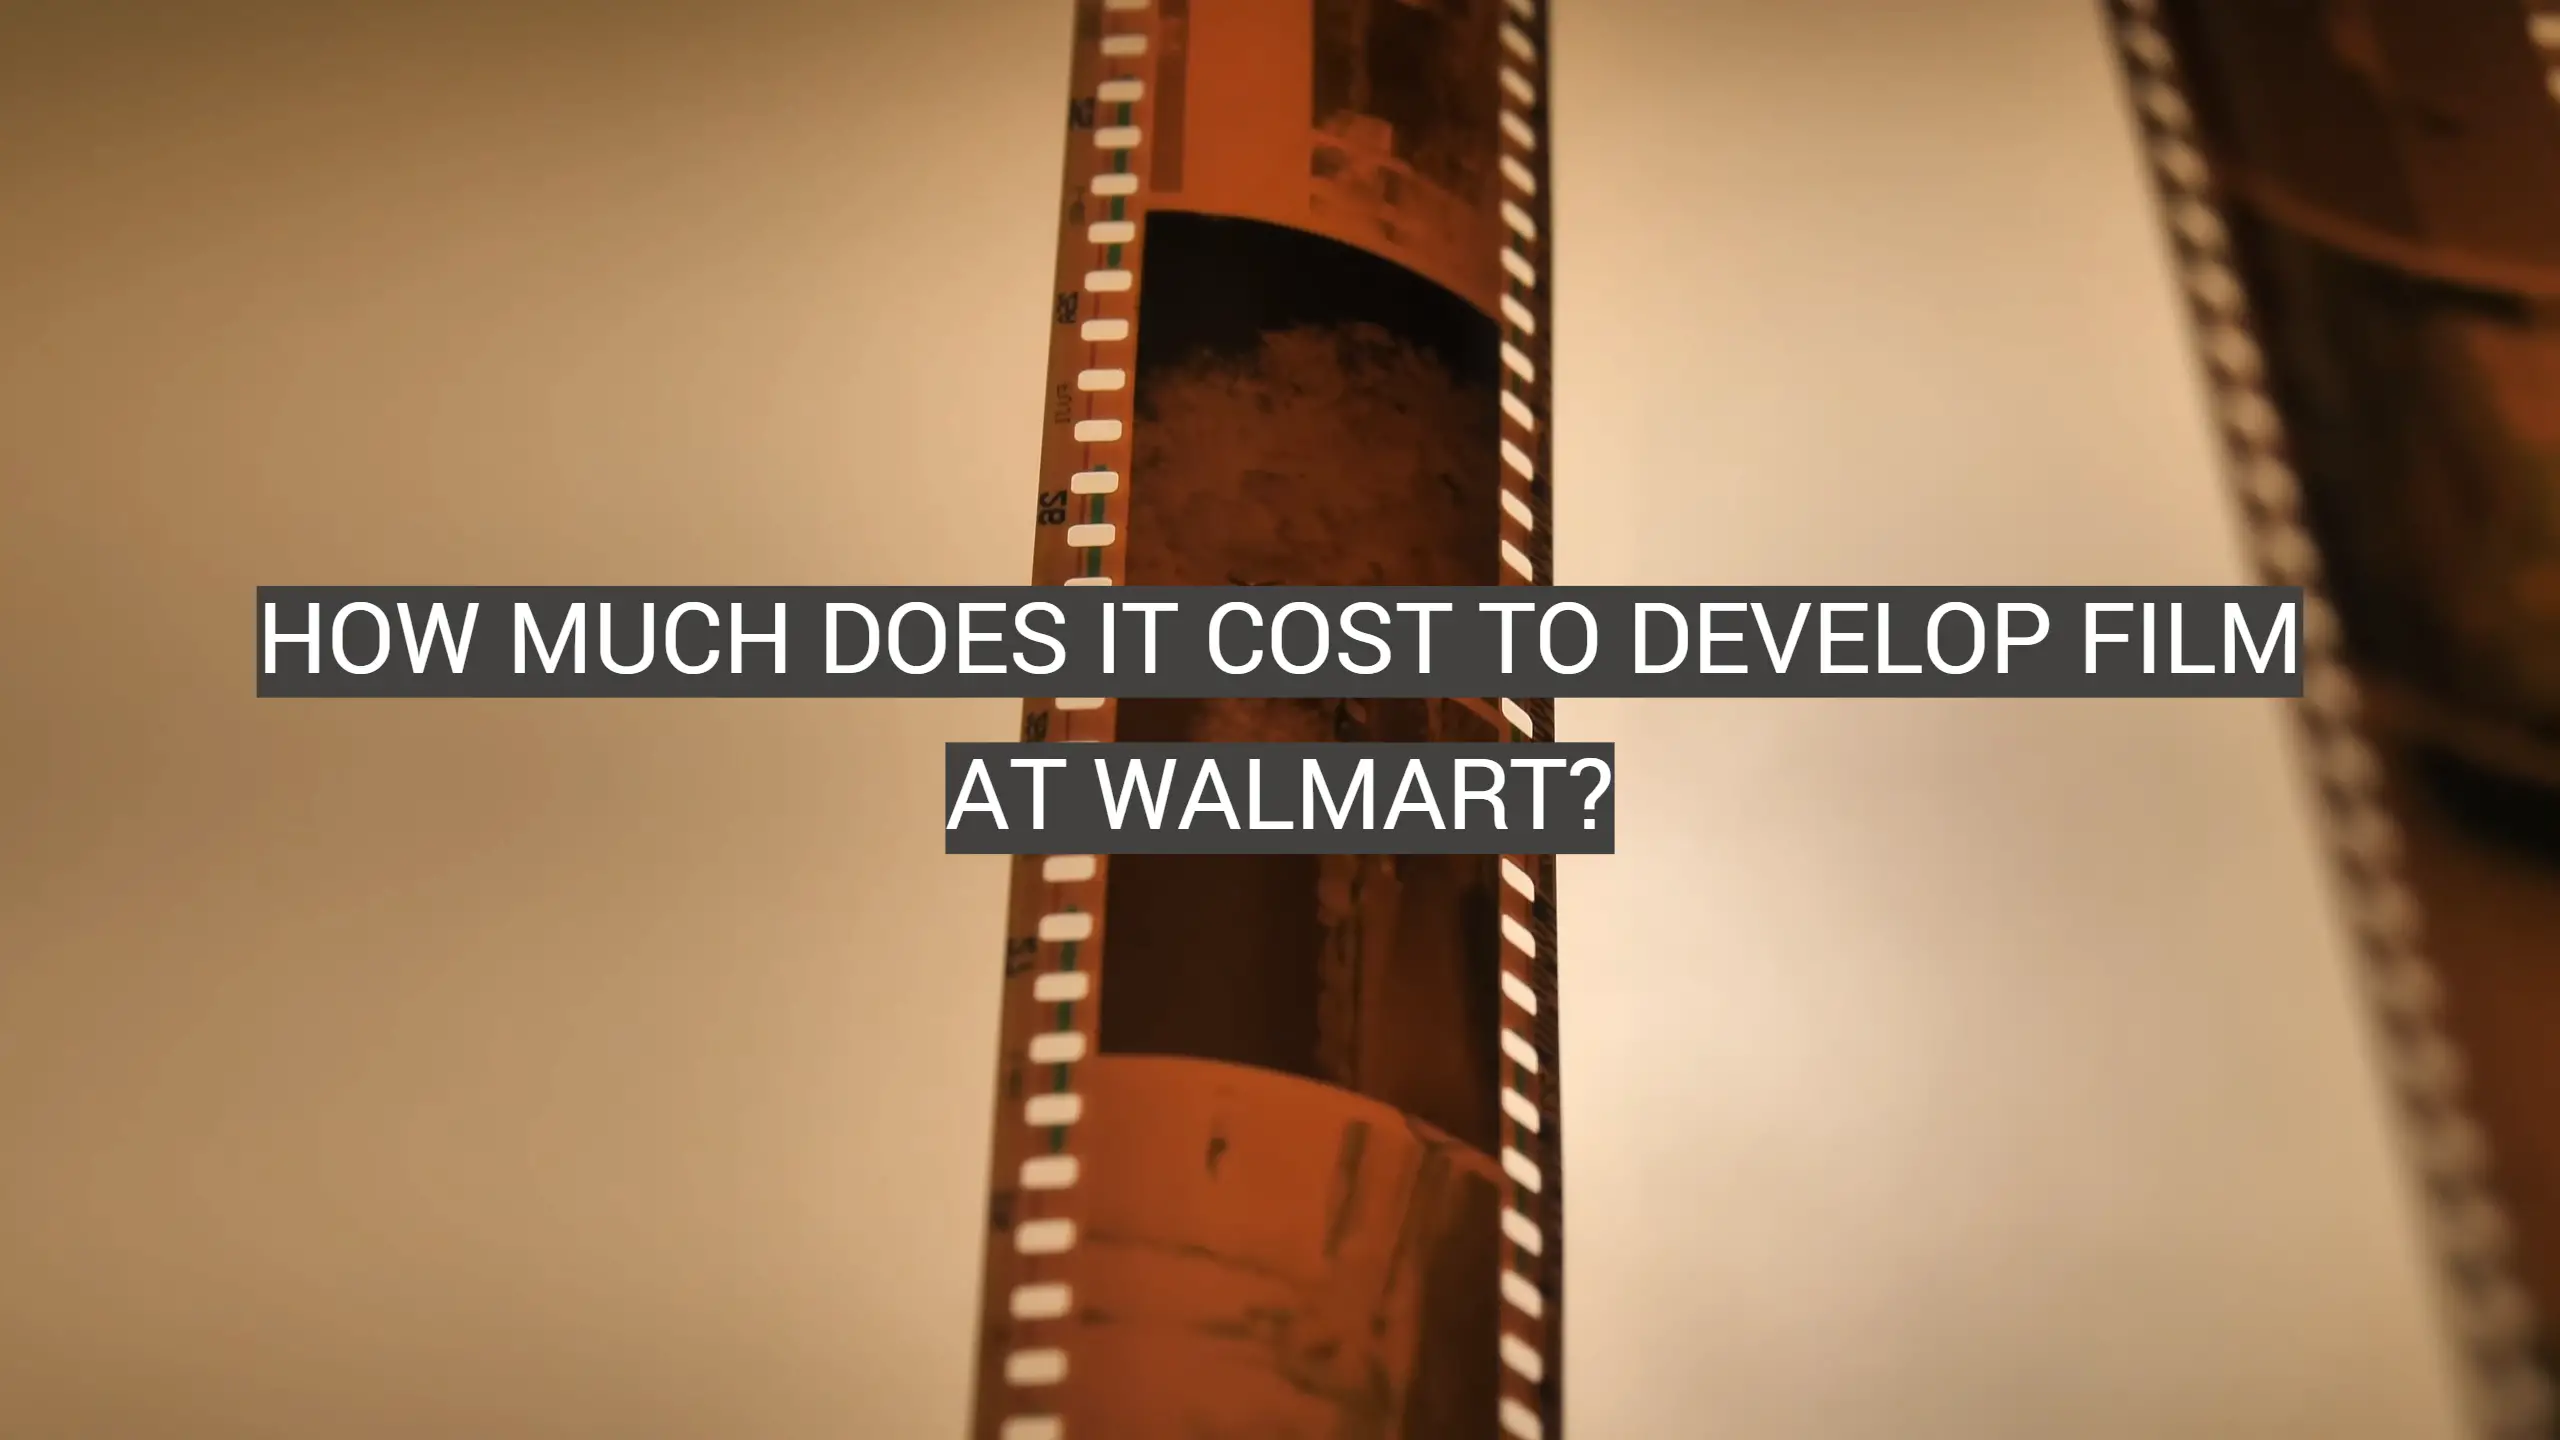 How Much Does It Cost to Develop Film at Walmart?